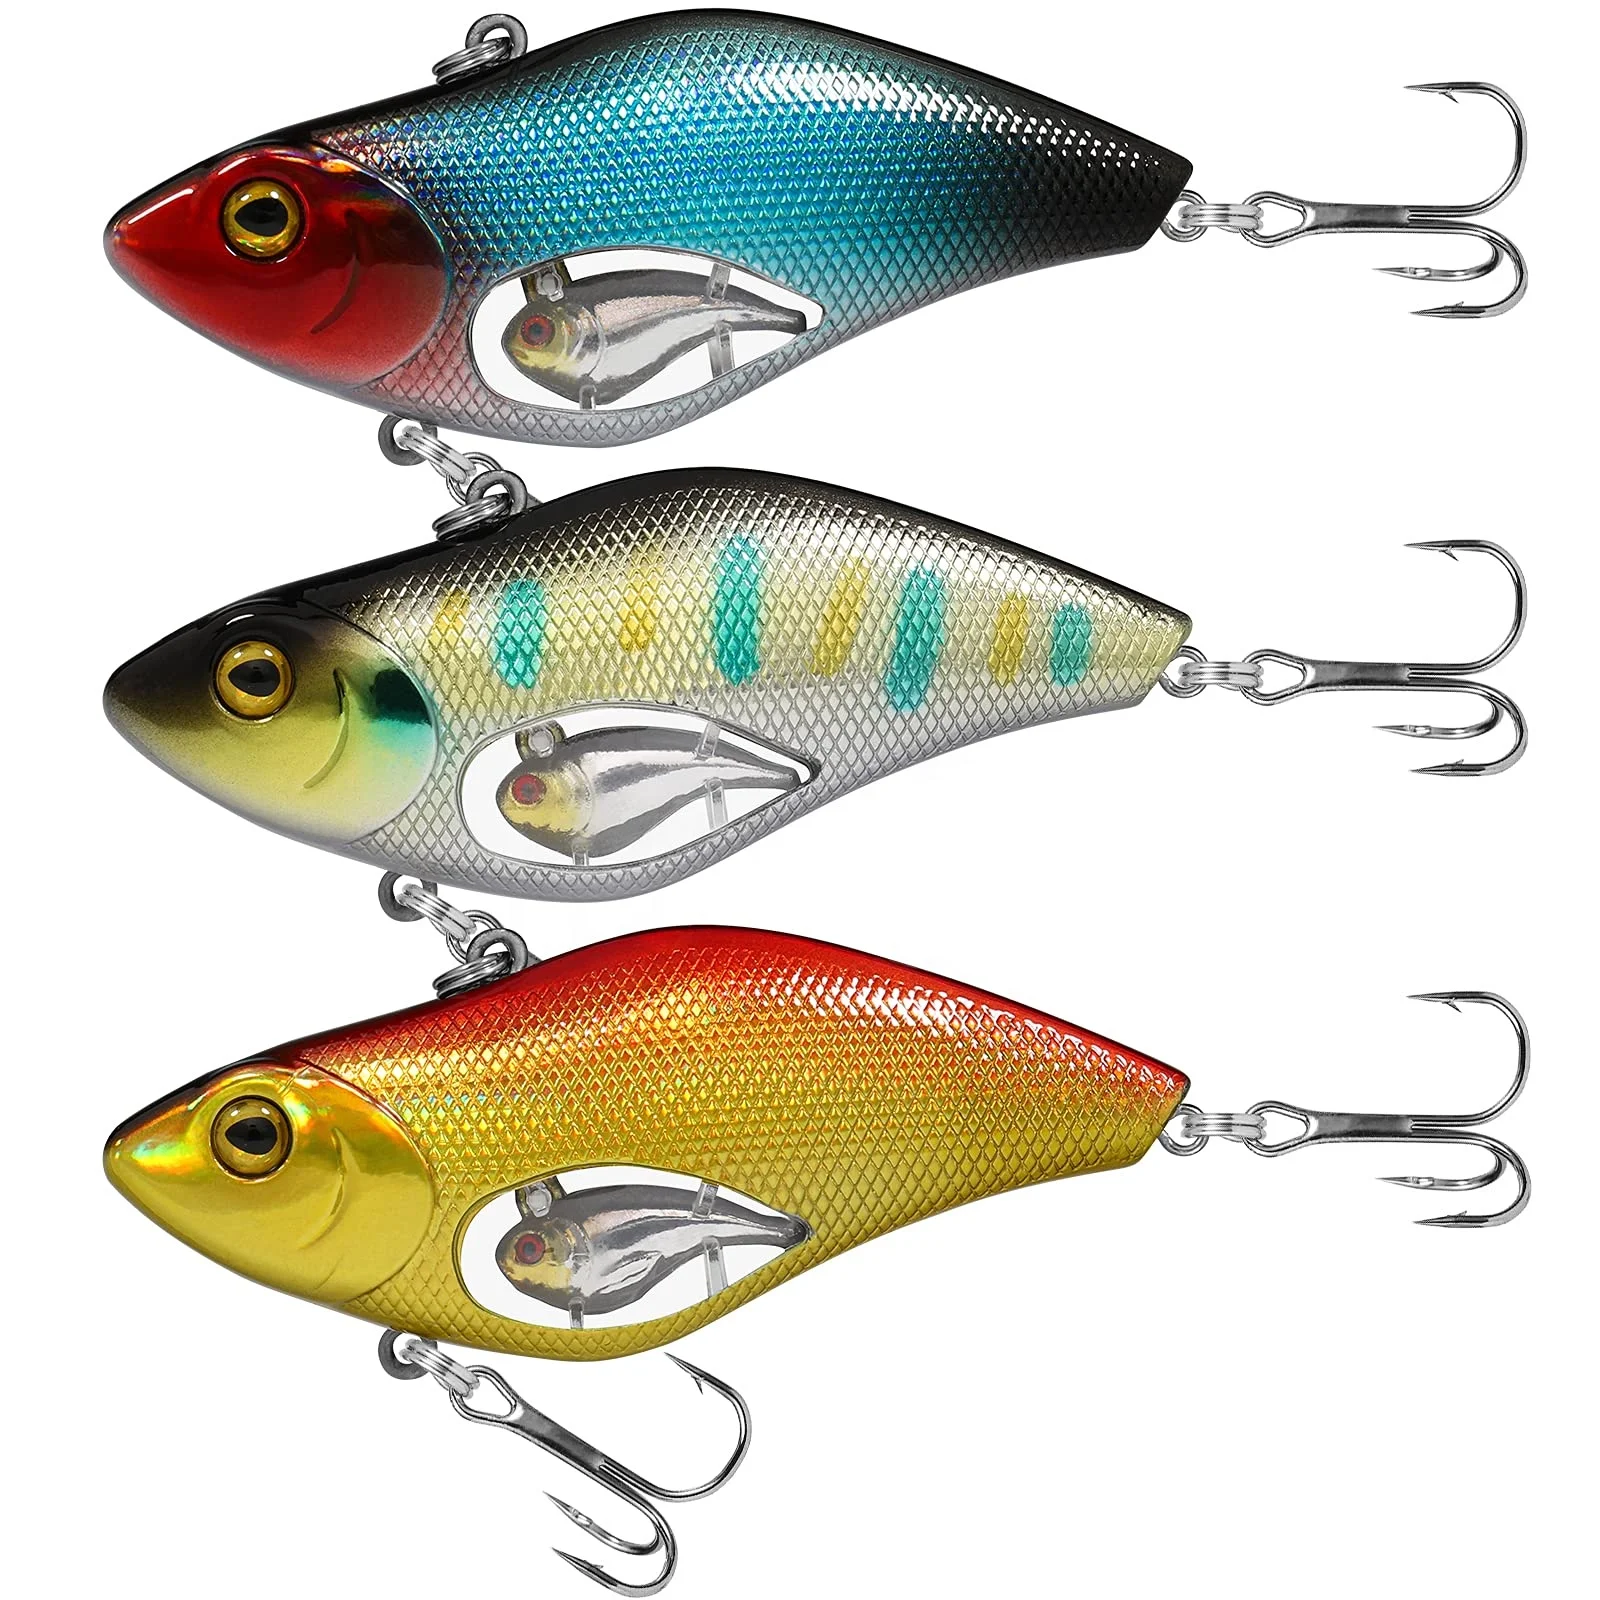 

TRUSCEND Fishing Lures for Bass Segmented Multi Swim baits Slow Sinking Swimming Lures for Freshwater Fishing Lures, I1-son & father